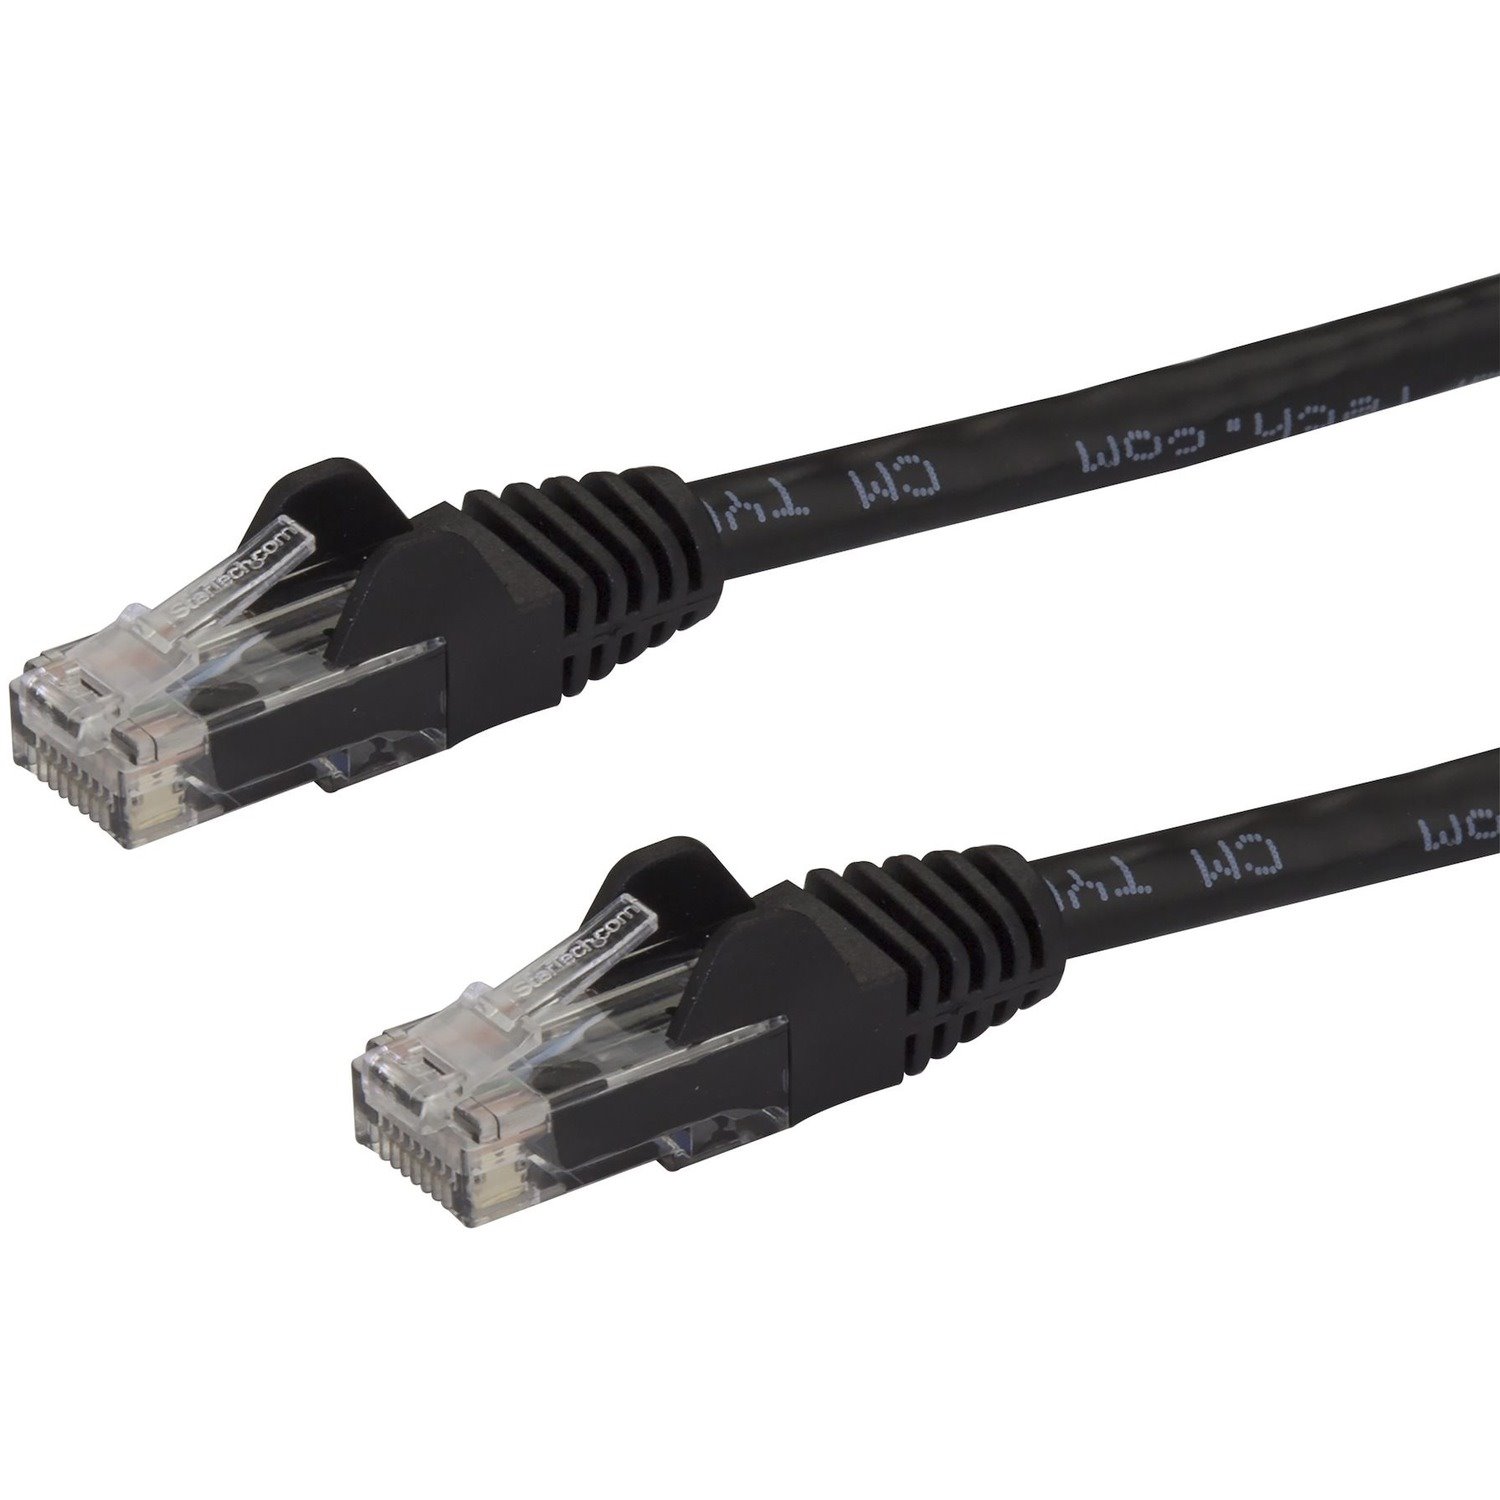 StarTech.com 3m CAT6 Ethernet Cable - Black Snagless Gigabit - 100W PoE UTP 650MHz Category 6 Patch Cord UL Certified Wiring/TIA